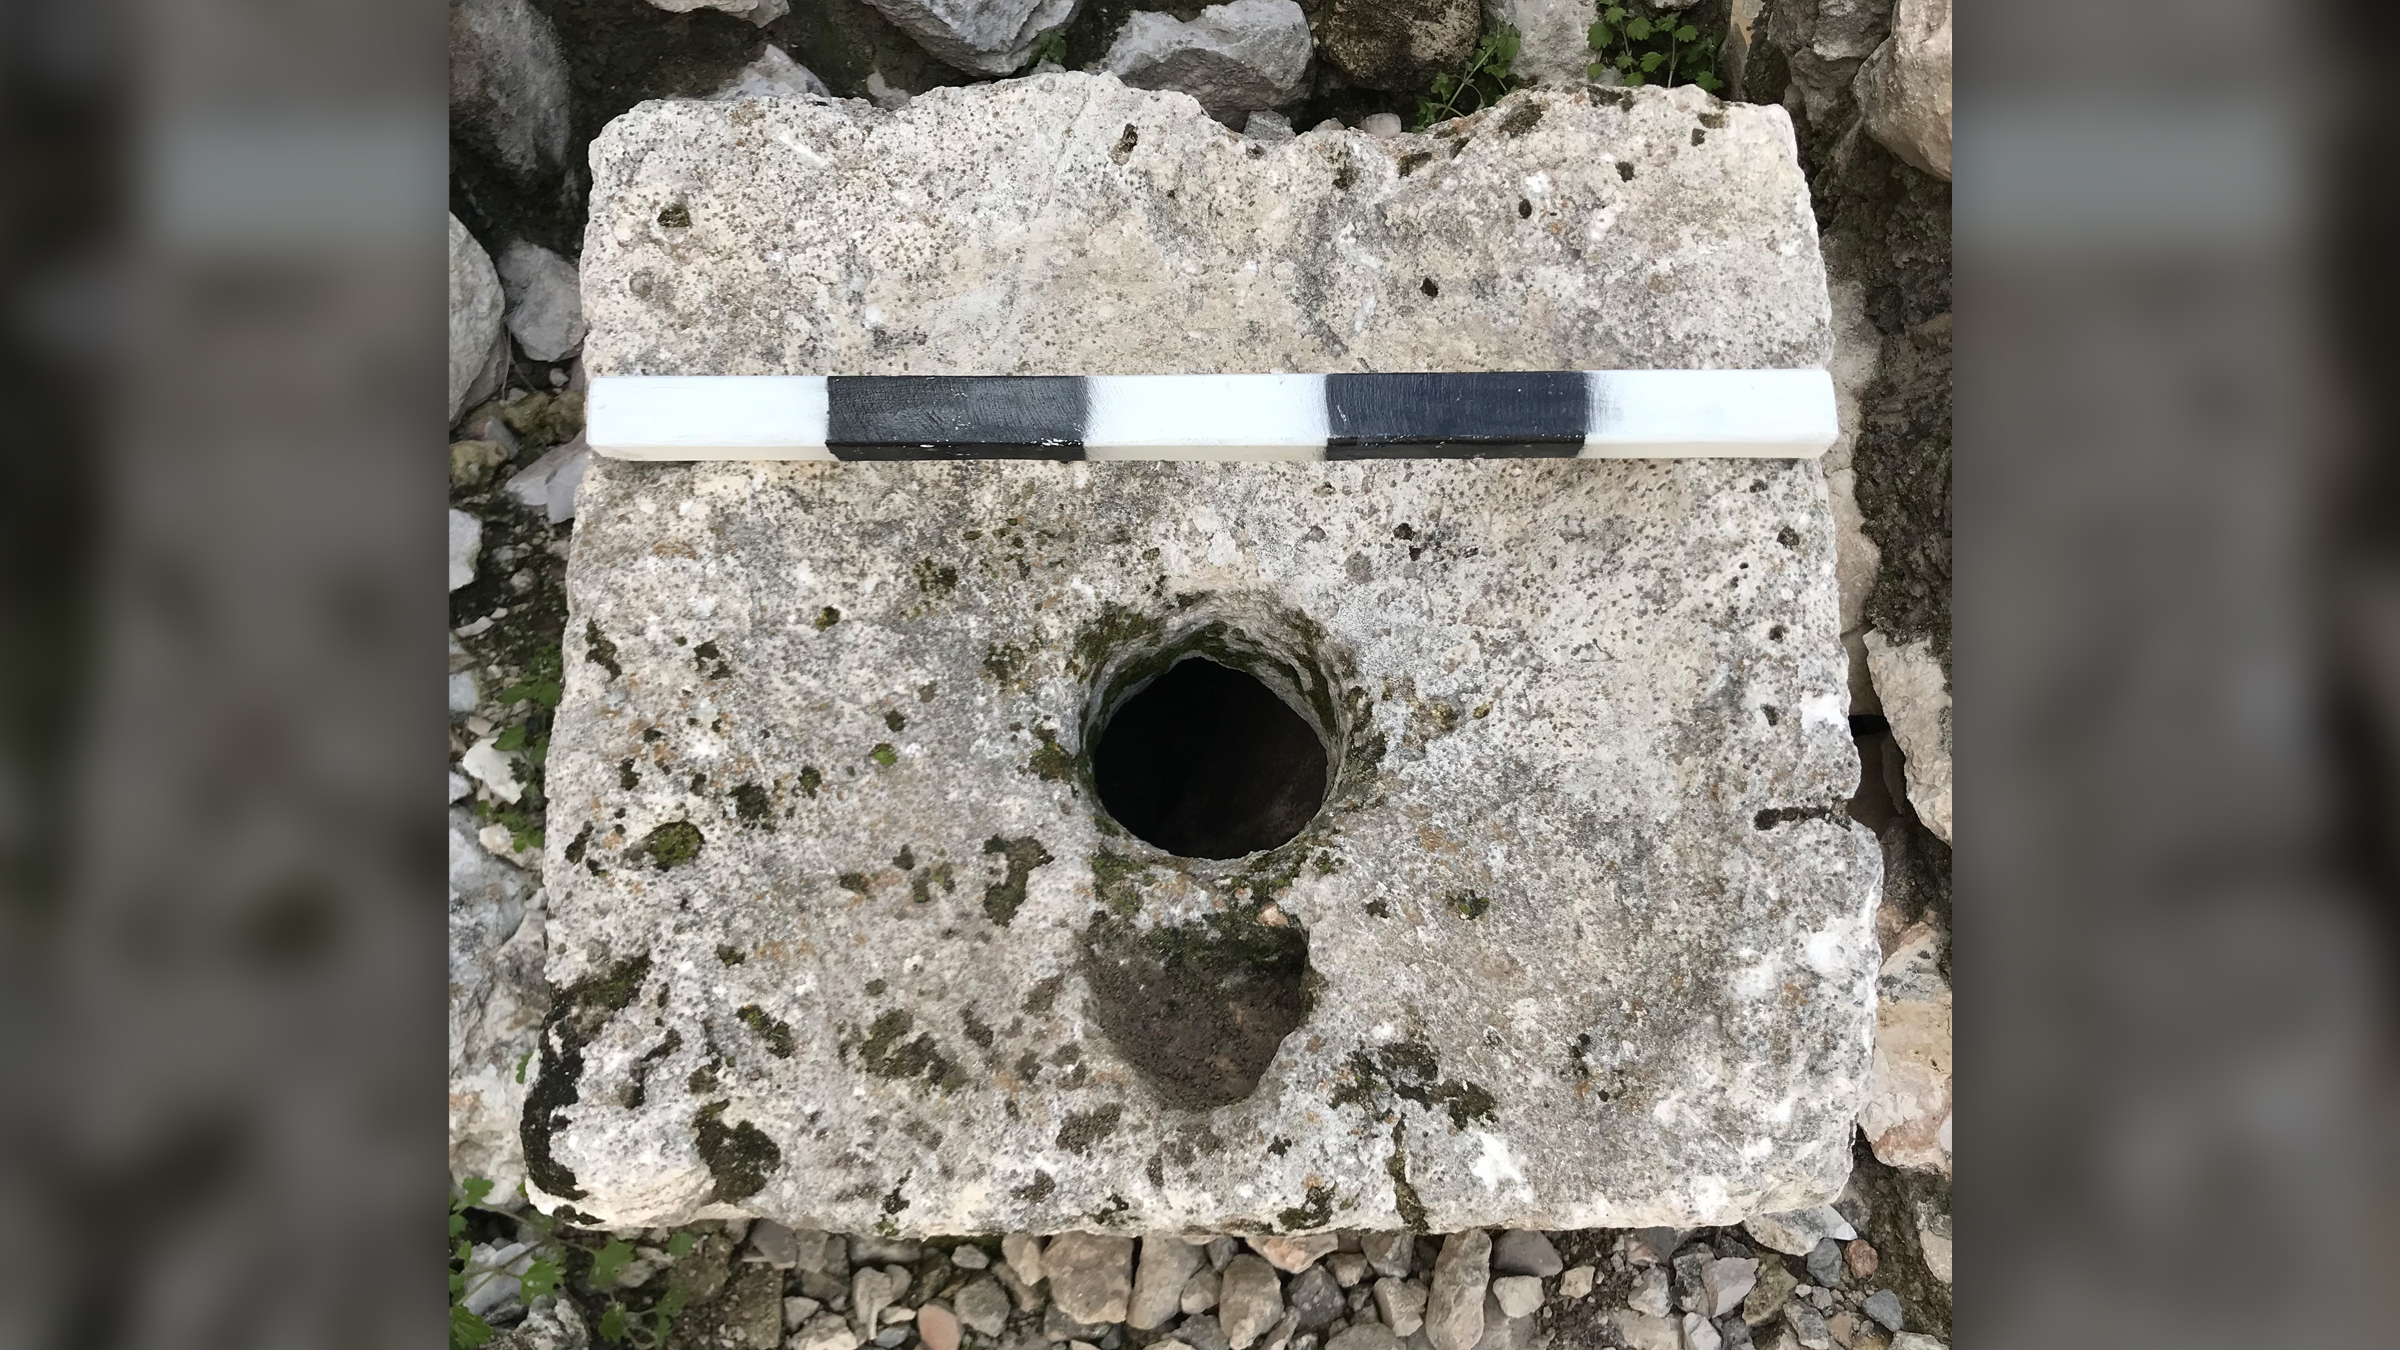 We see a white and black stone block with a hole in the center. It has a measuring stick on it.